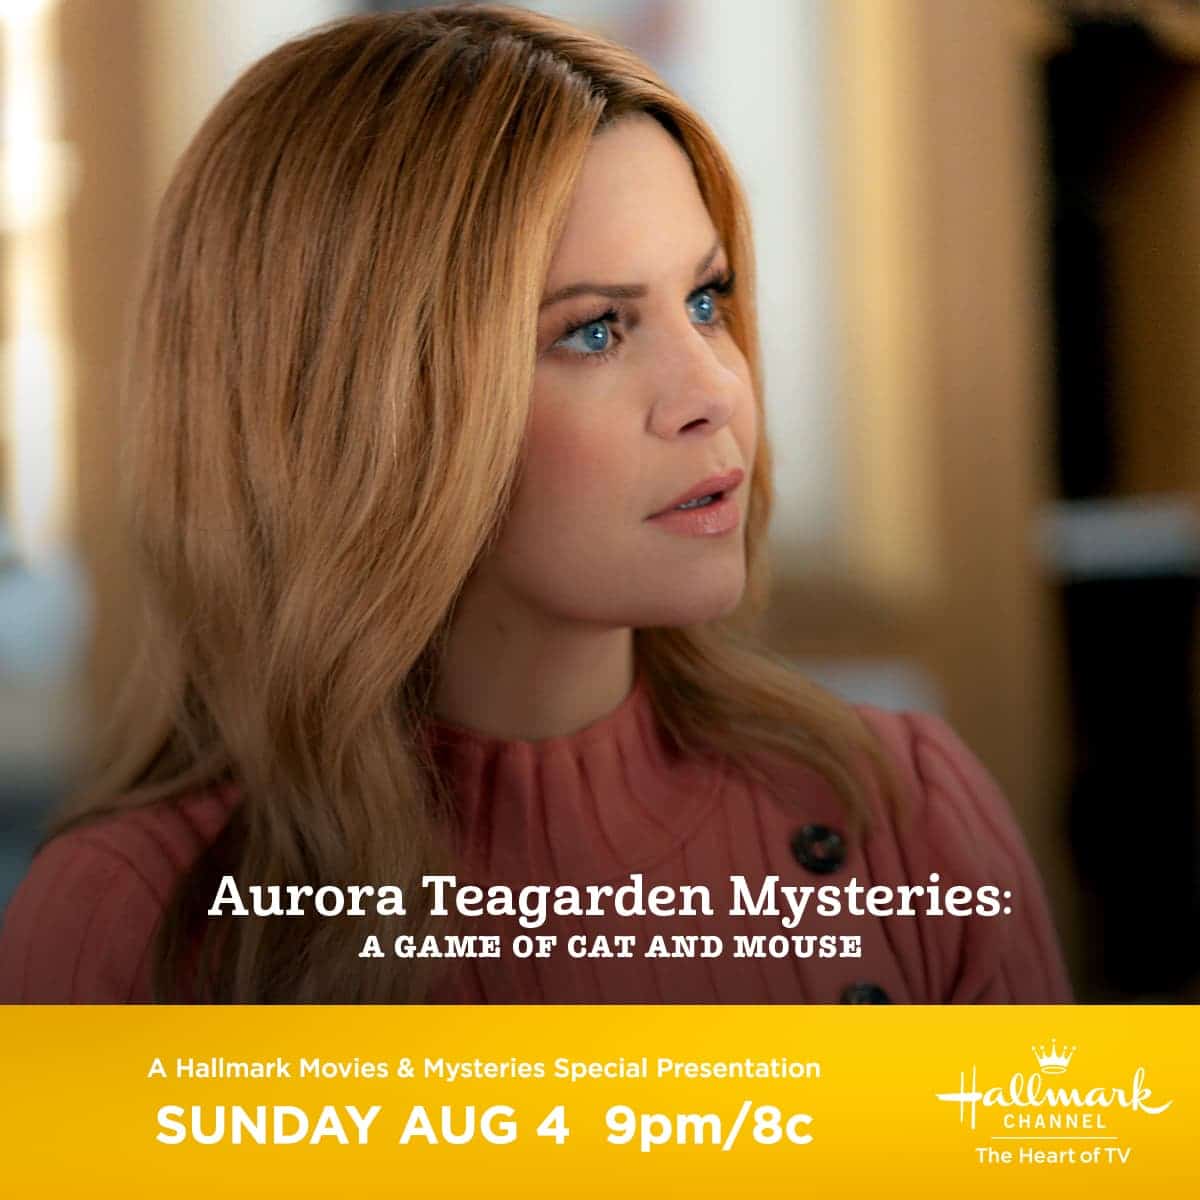 Hallmark Movies & Mysteries "Aurora Teagarden Mysteries: A Game of Cat and Mouse" Premiering this Sunday, August 4th